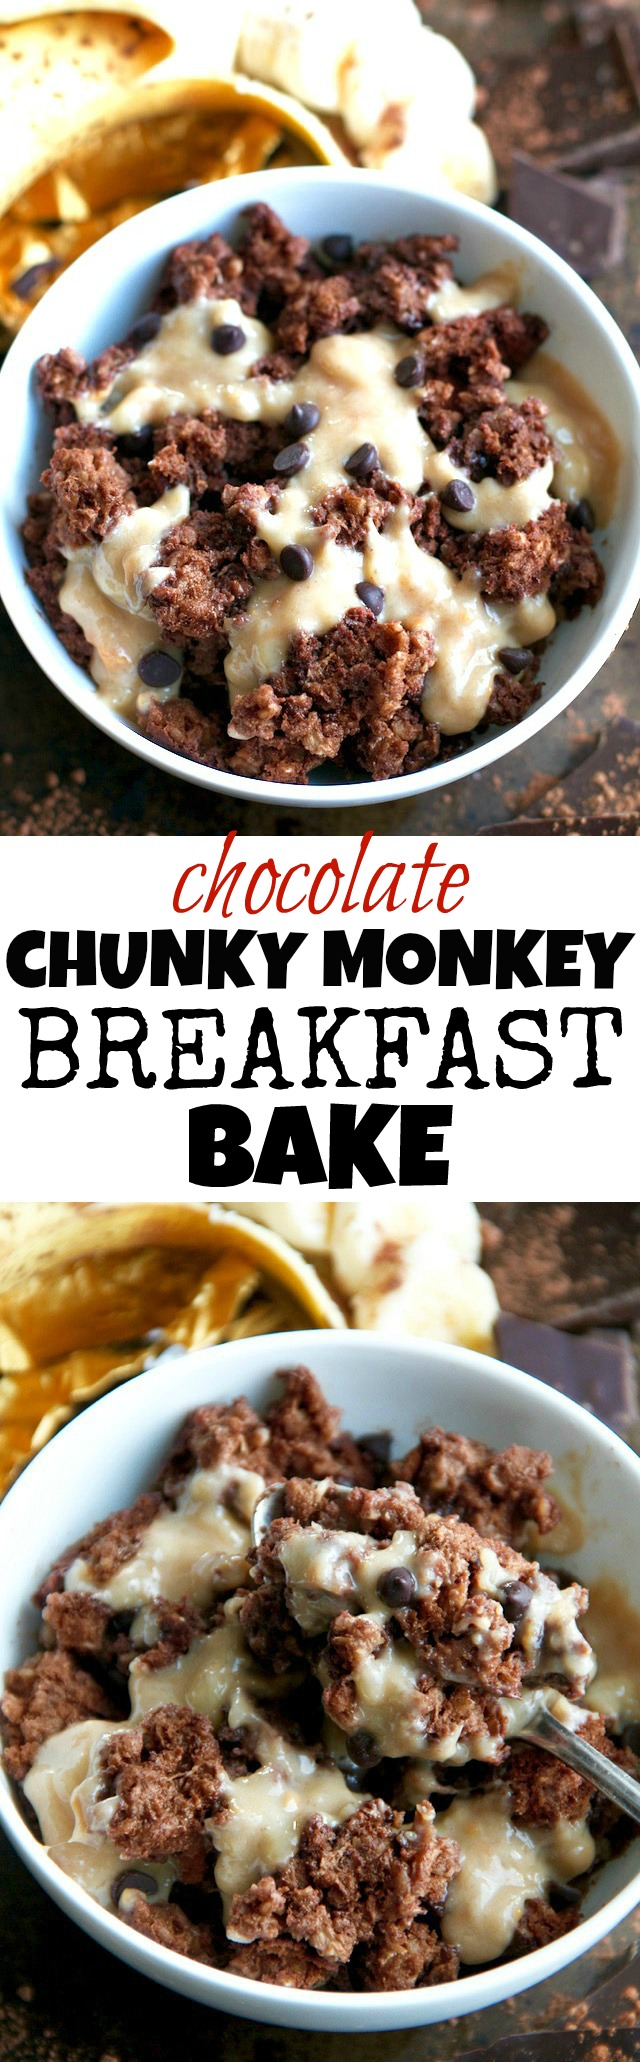 This healthy Chocolate Chunky Monkey Breakfast bake combines the light and fluffy texture of a muffin with the hearty staying power of baked oats! PERFECT for anyone who loves eating dessert for breakfast! | runningwithspoons.com #vegan #breakfast #healthy #recipe